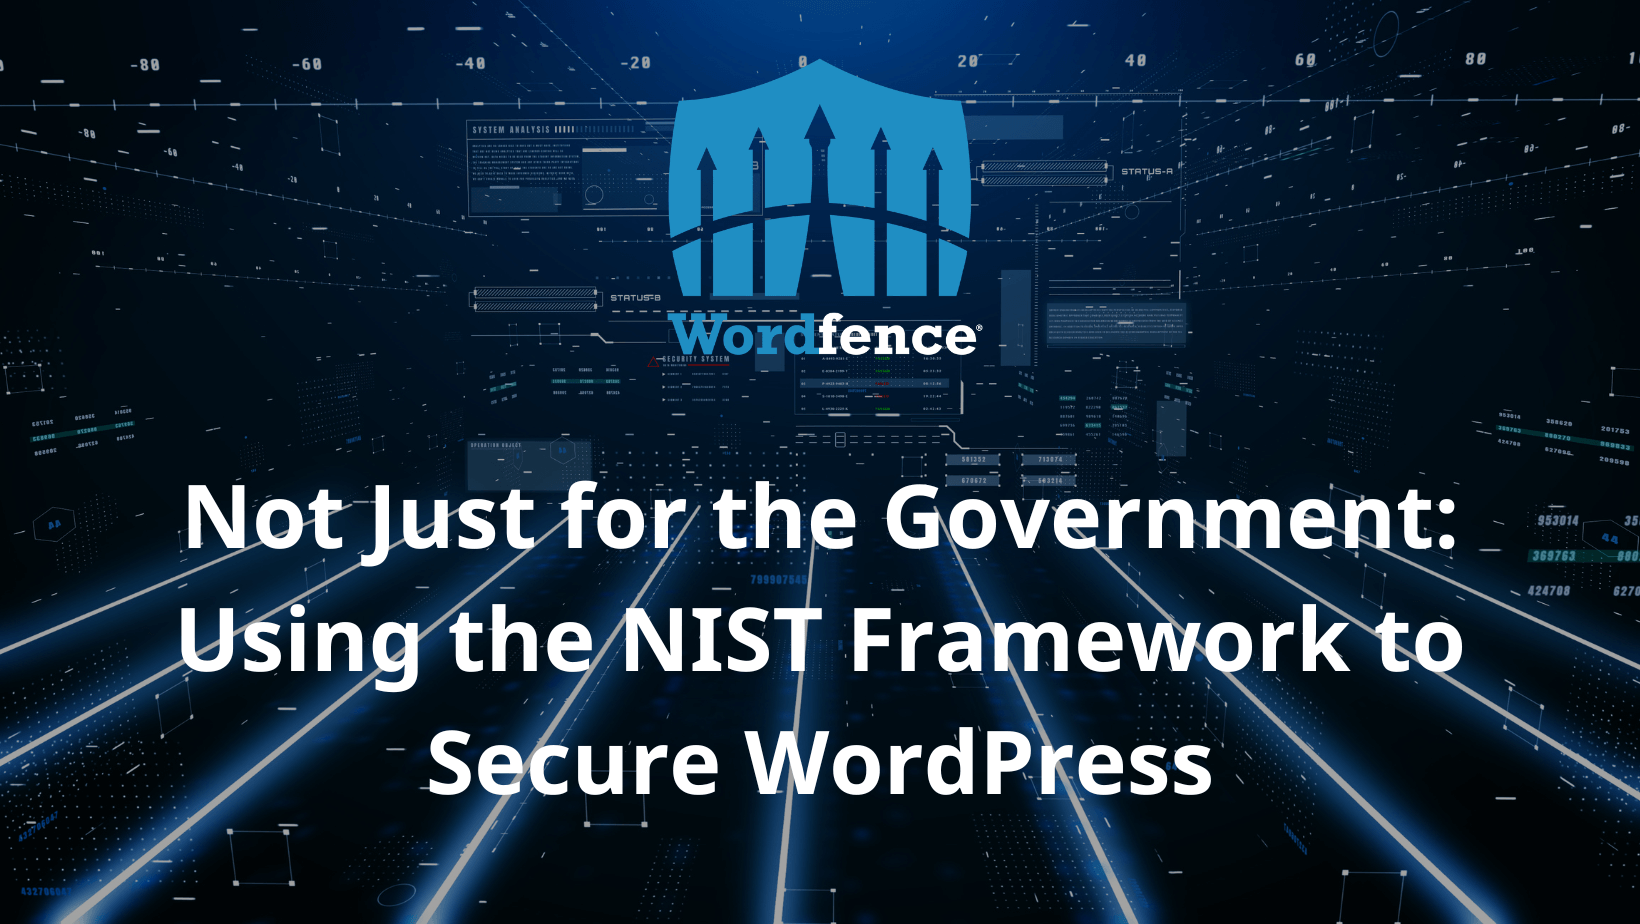 Not Just for the Government: Using the NIST Framework to Secure WordPress